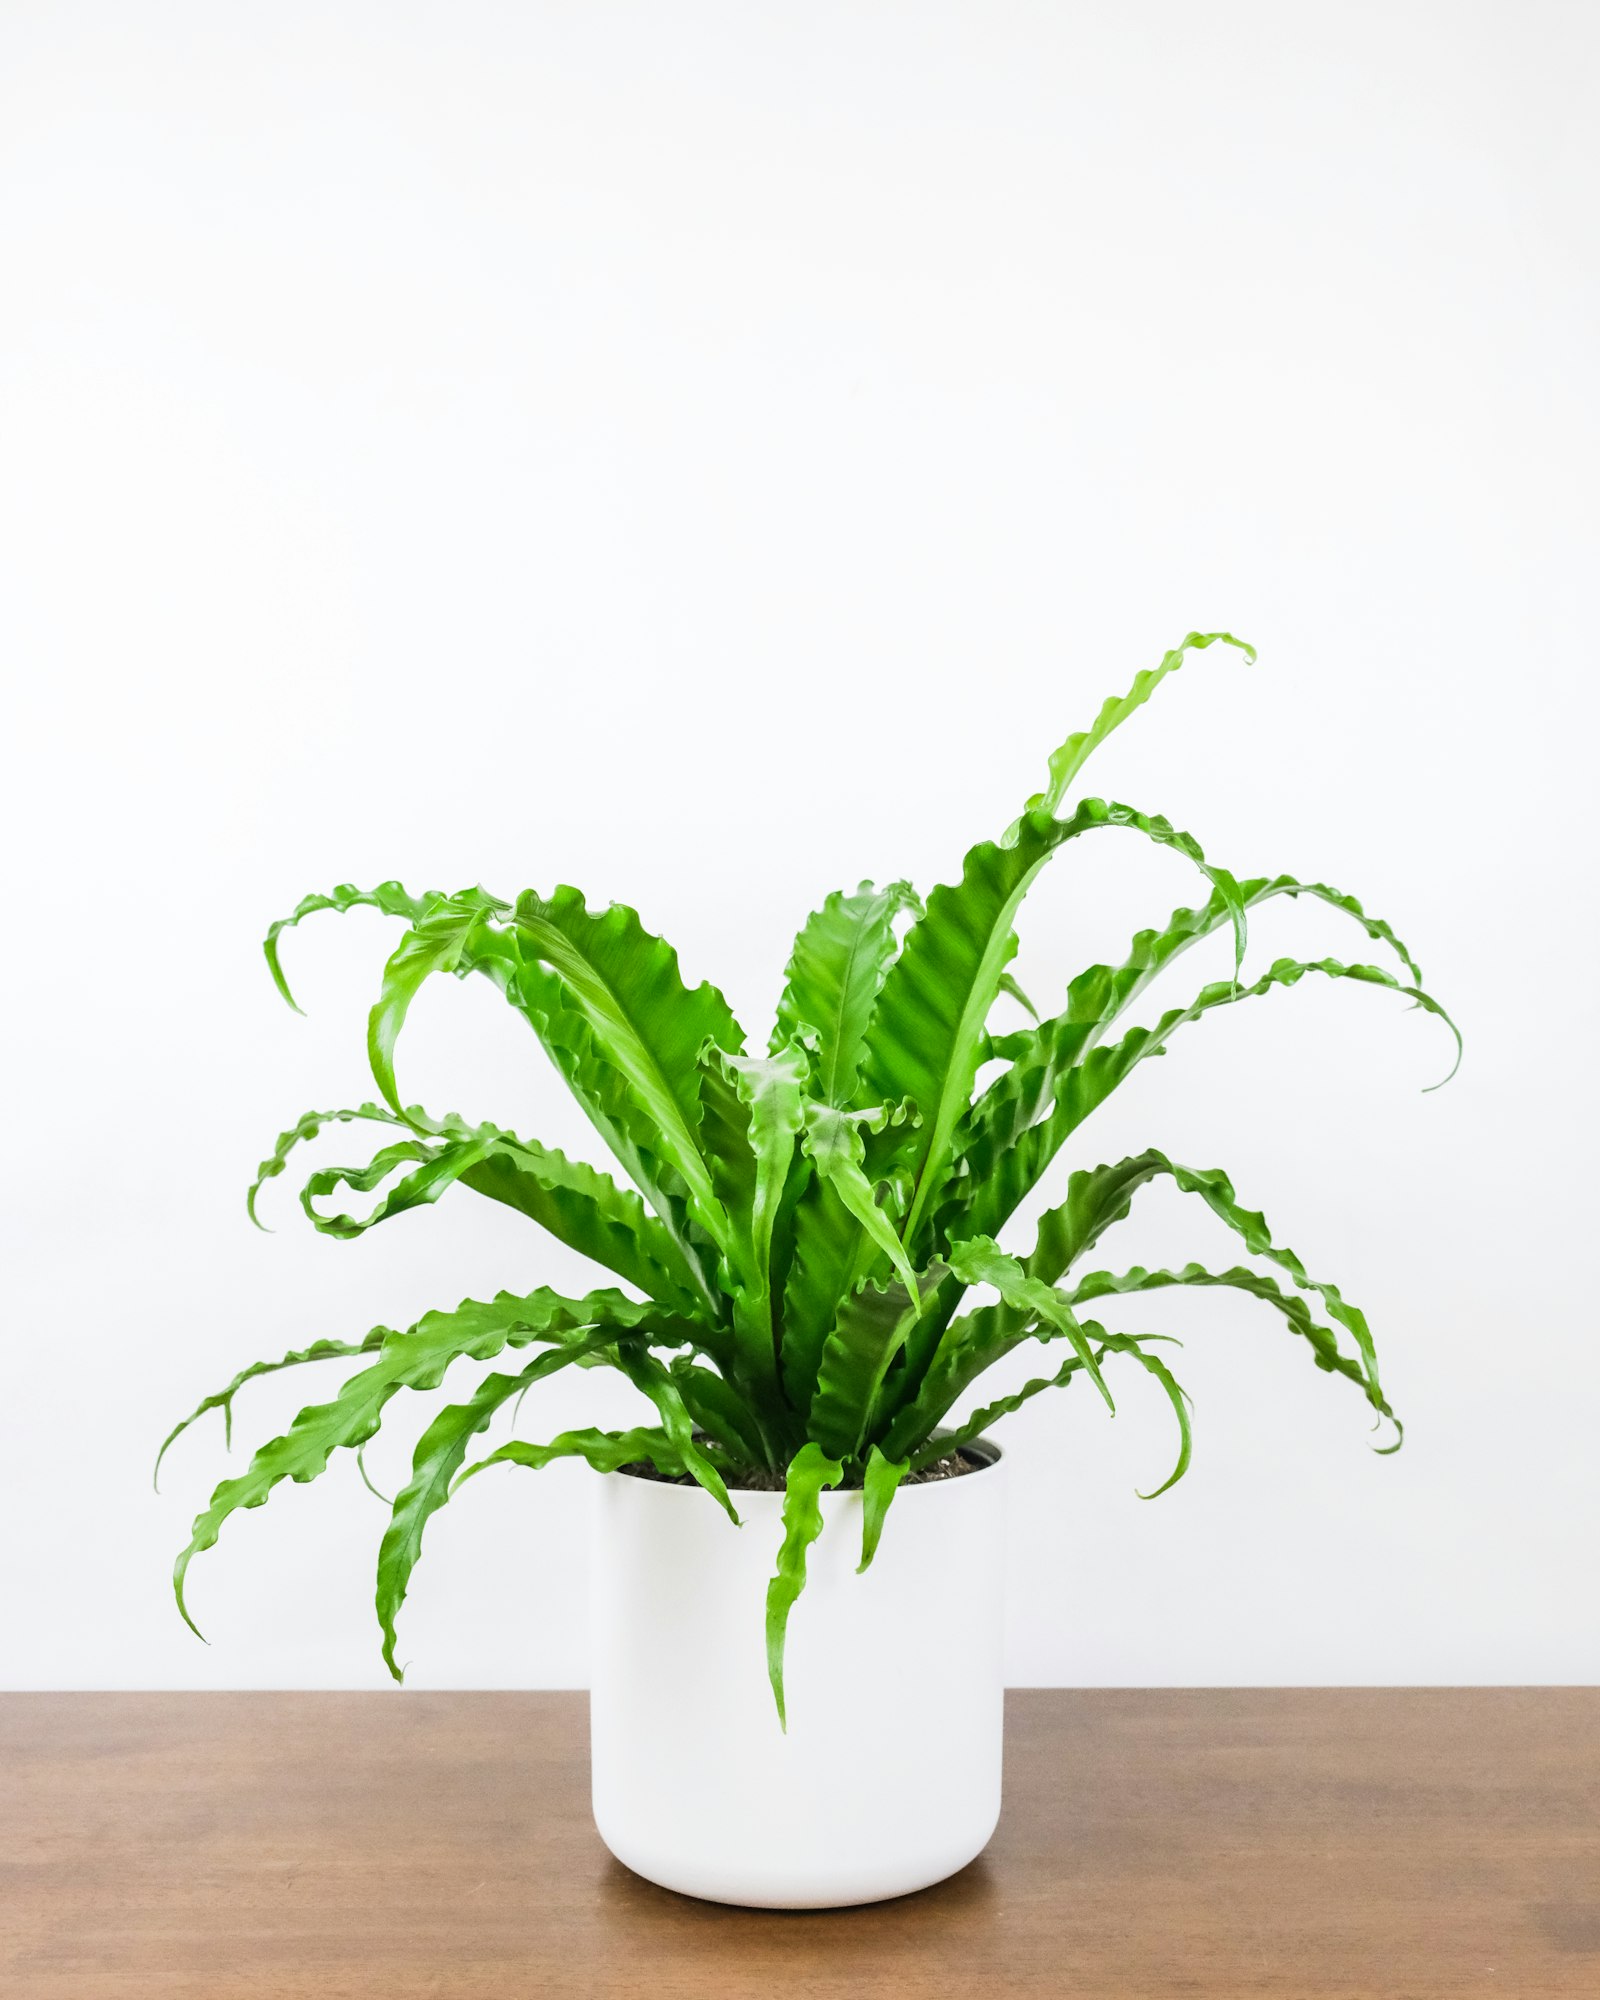 Vertical shot of a potted bird's-nest fern on the table against a white background